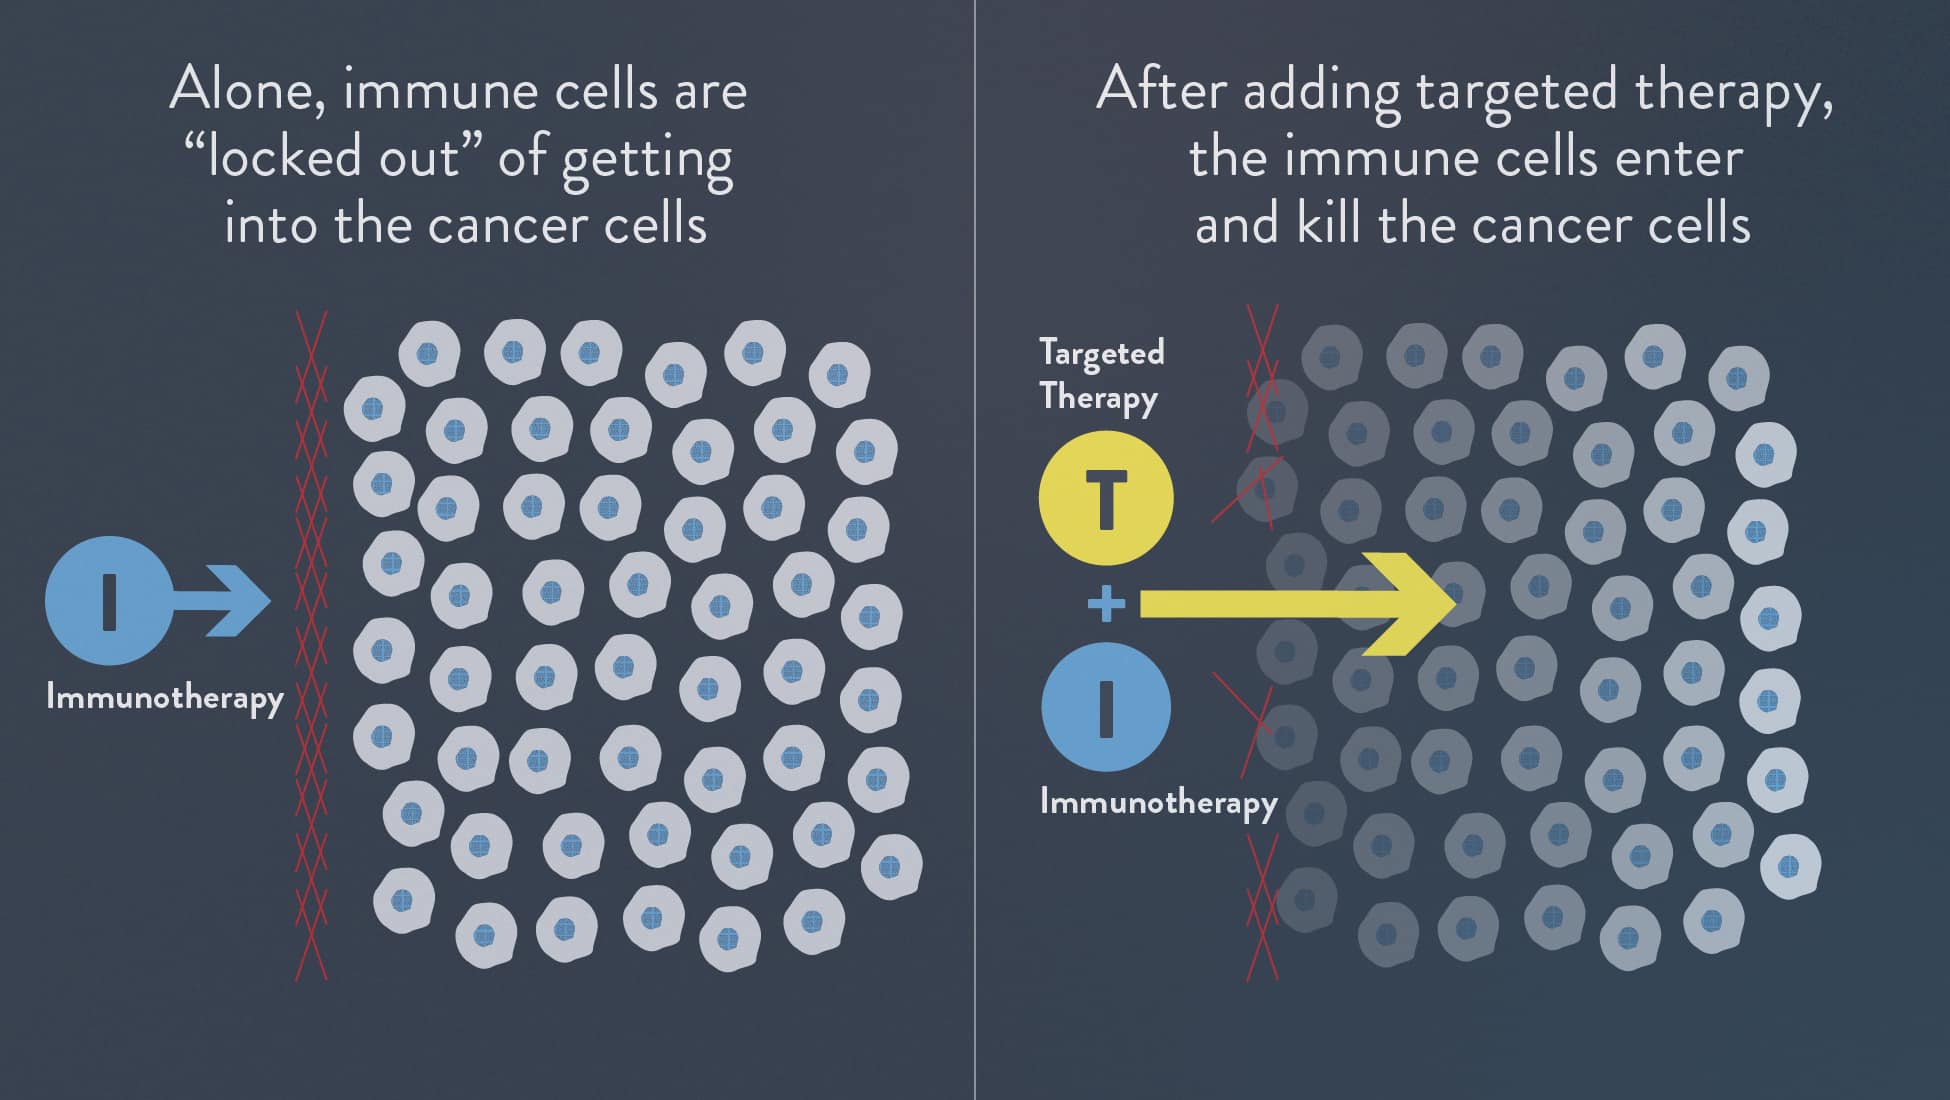 Combining immunotherapy and targeted therapy allows immune cells to kill cancer cells